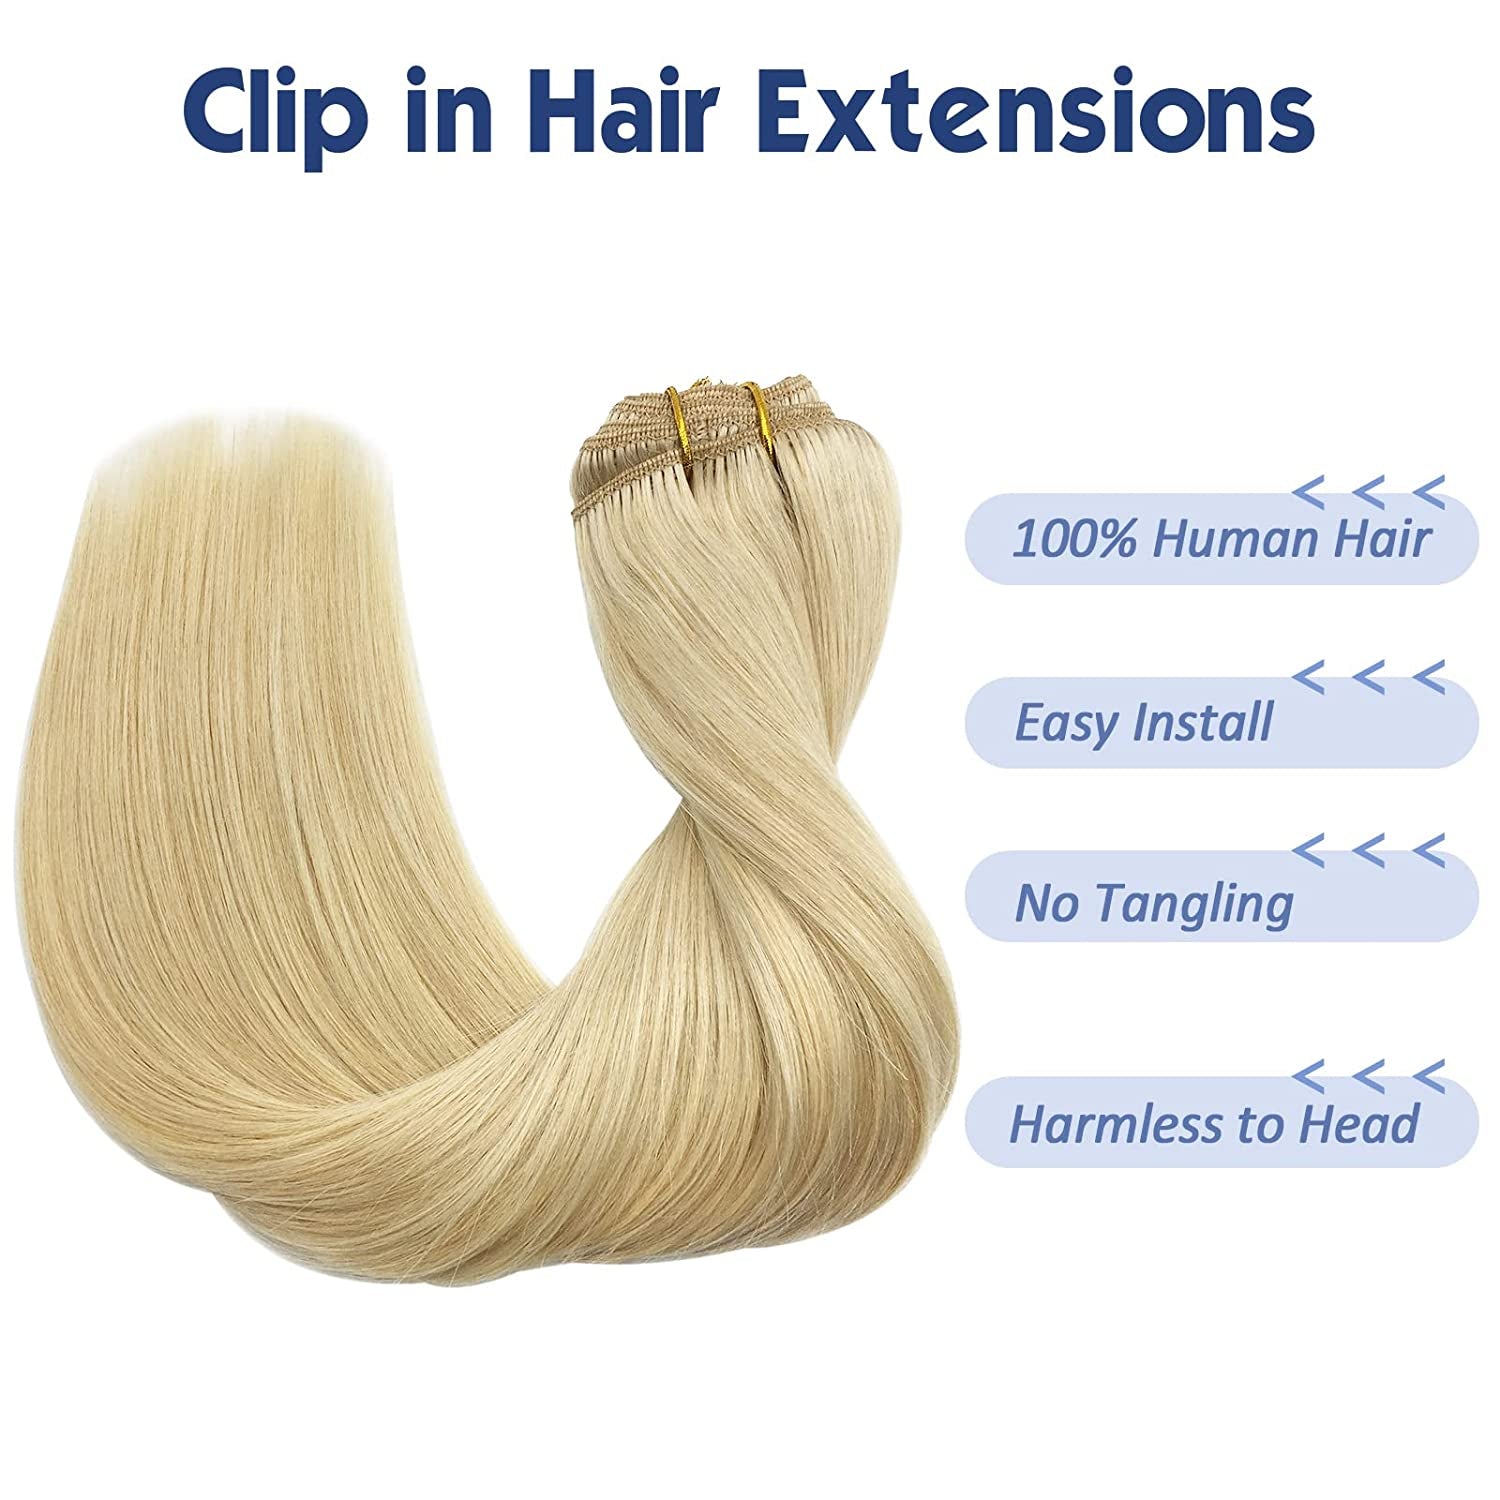 GOO GOO Real Hair Extensions Clip in Human Hair Bleach Blonde 7Pcs 120G 18 Inch Clip in Hair Extensions Human Hair Straight Hair Estensions Remy Hair Extensions for Women